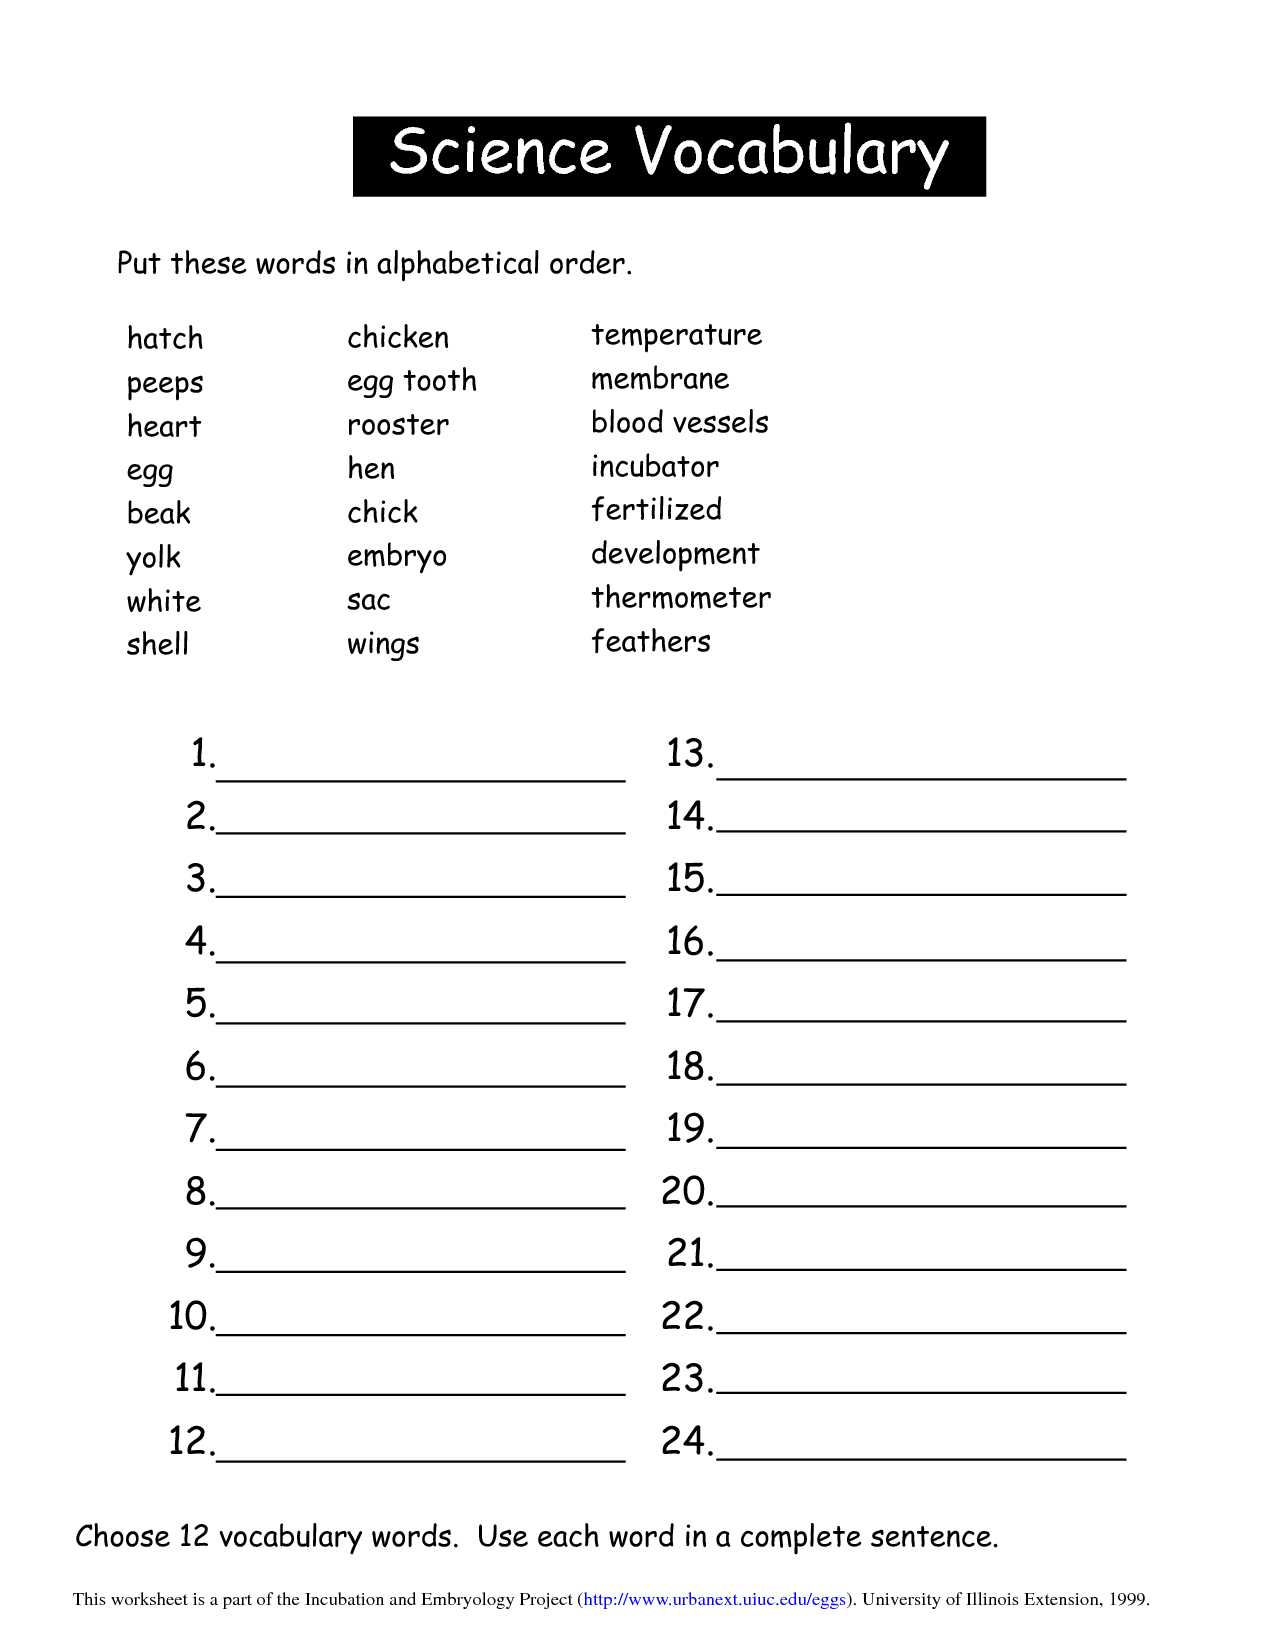 Vocabulary Worksheets | Science Vocabulary Worksheets PDF 